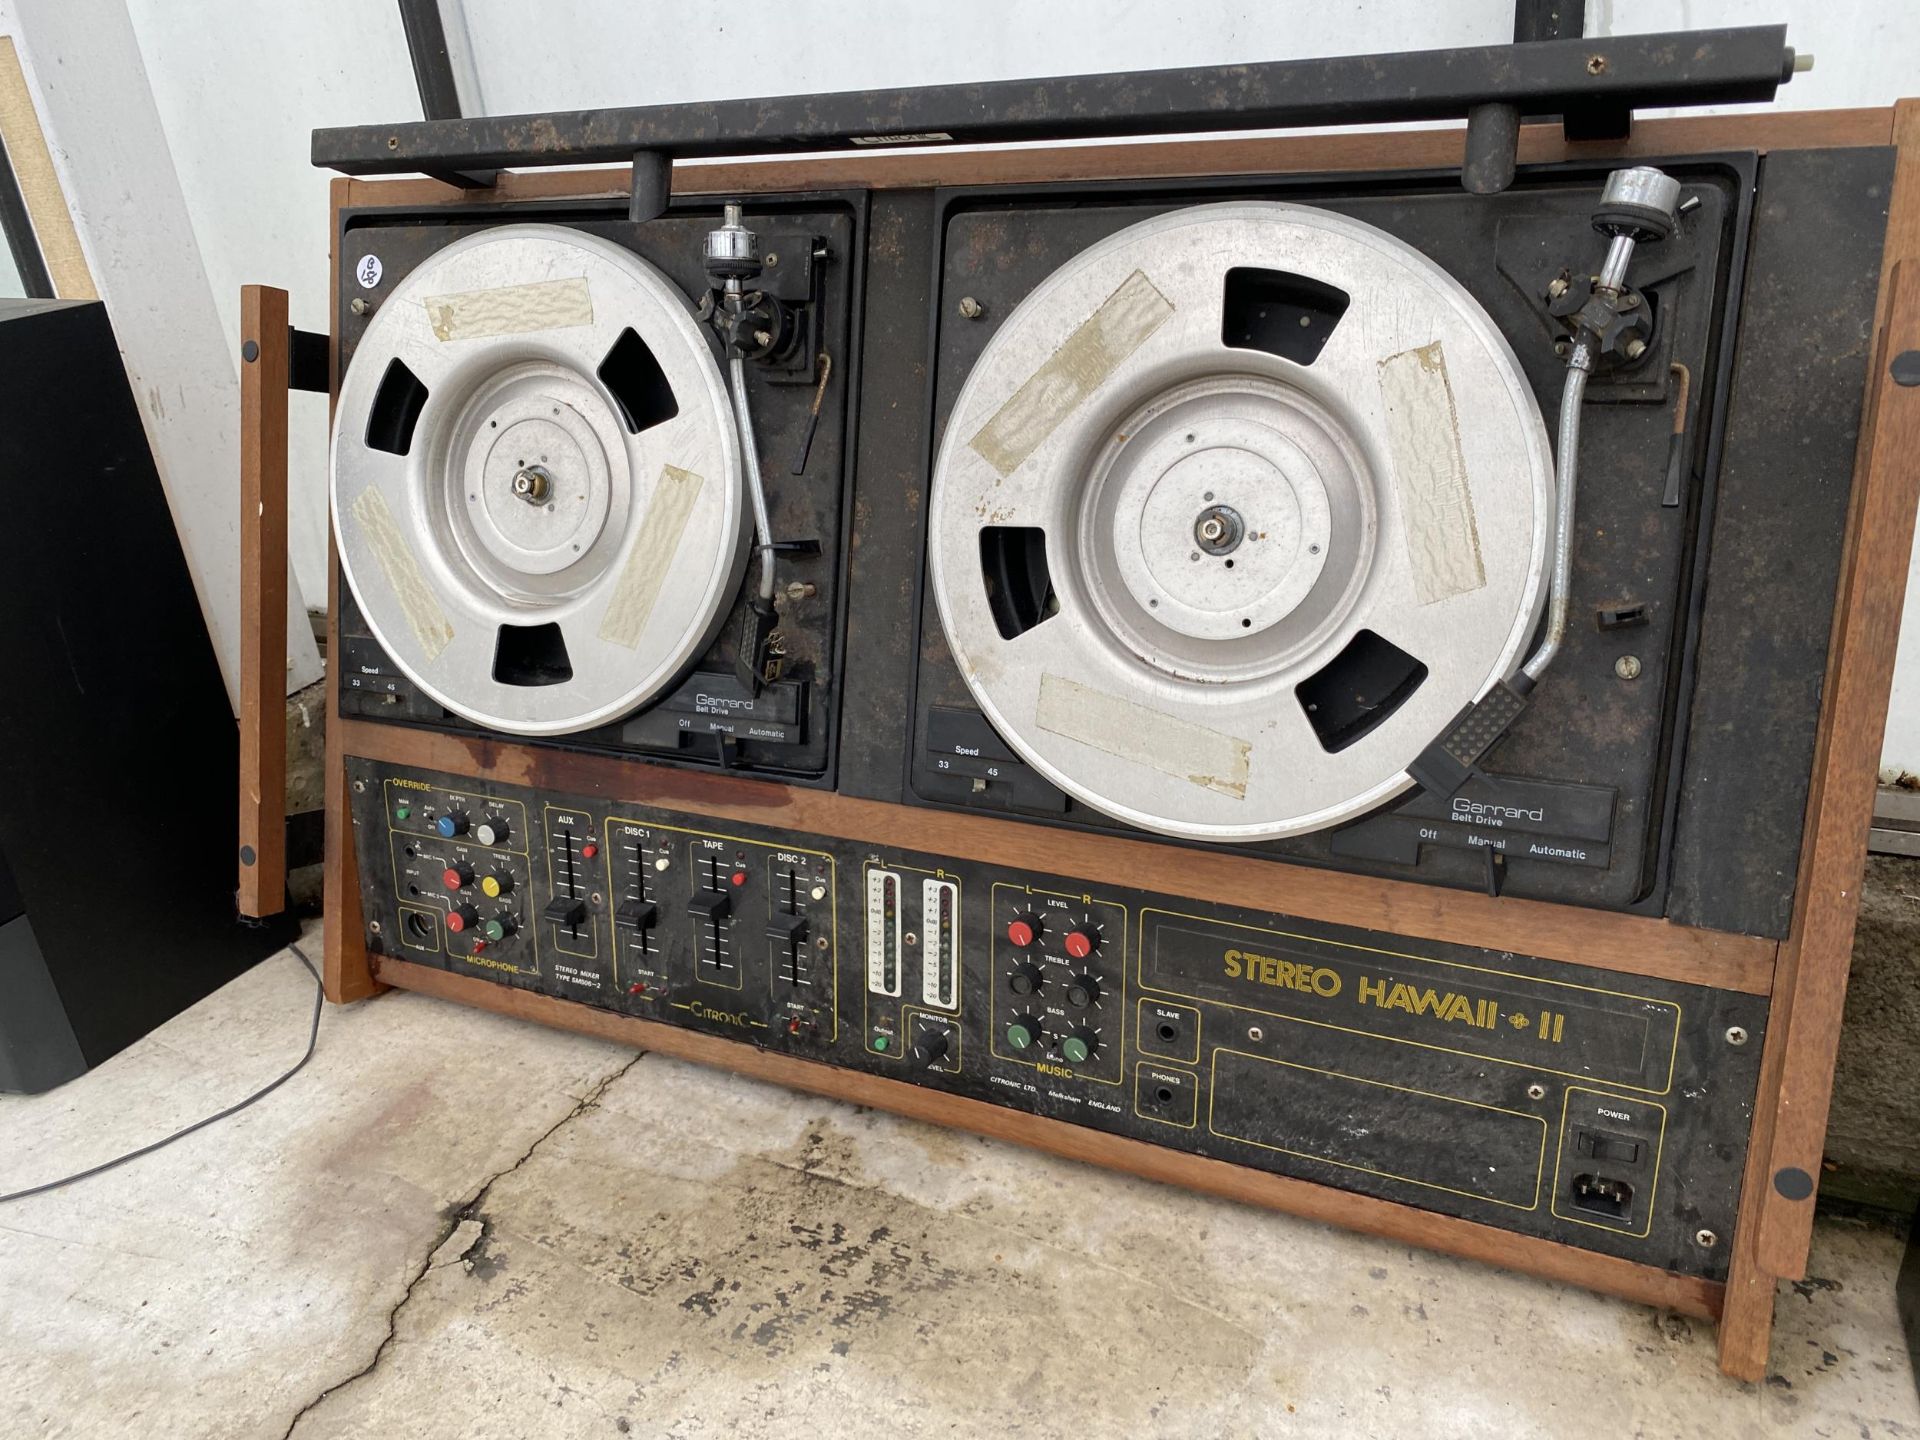 A RETRO STEREO HAWAII II WITH GARRARD RECORD DECK - Image 2 of 2